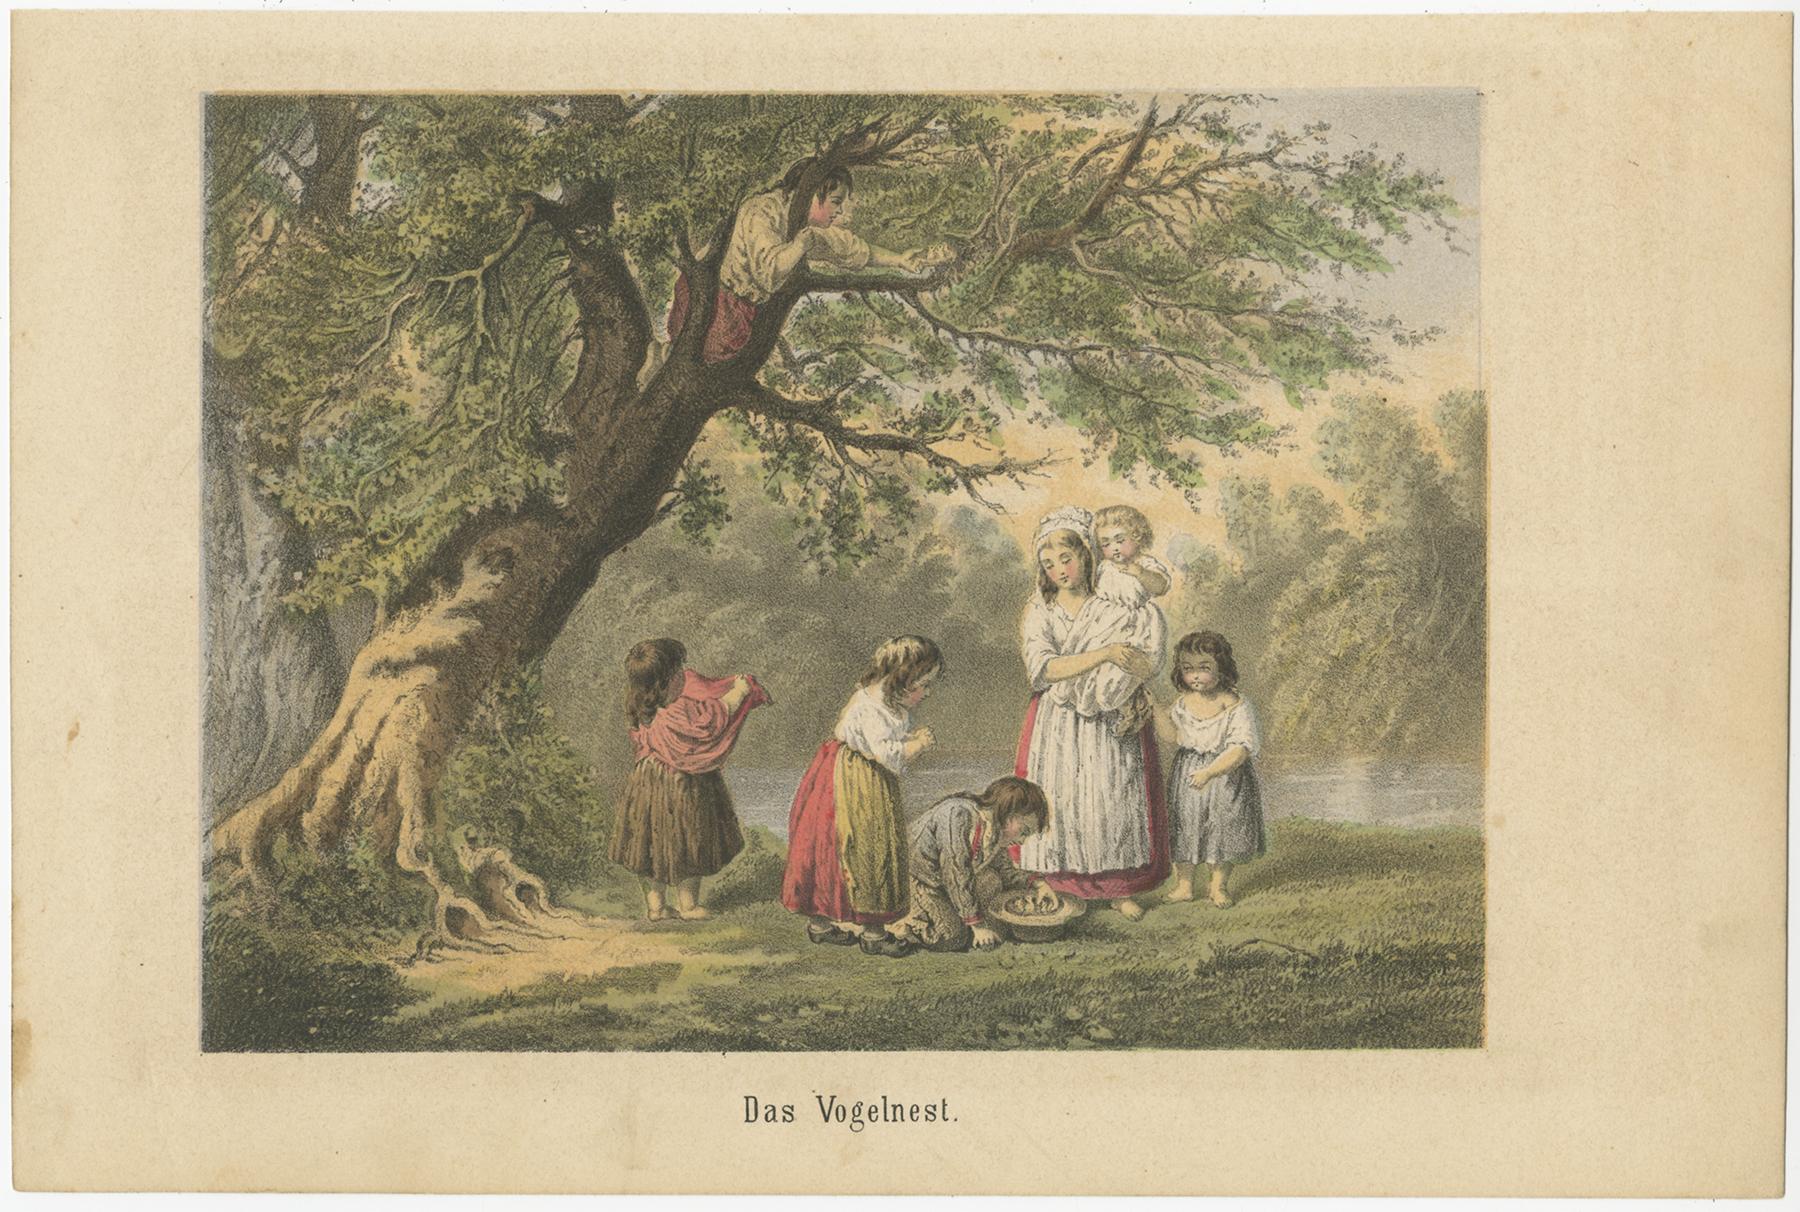 Antique print titled 'Das Vogelnest'. Old lithograph of a group of children finding a bird's nest. Source unknown, to be determined. Published circa 1860.